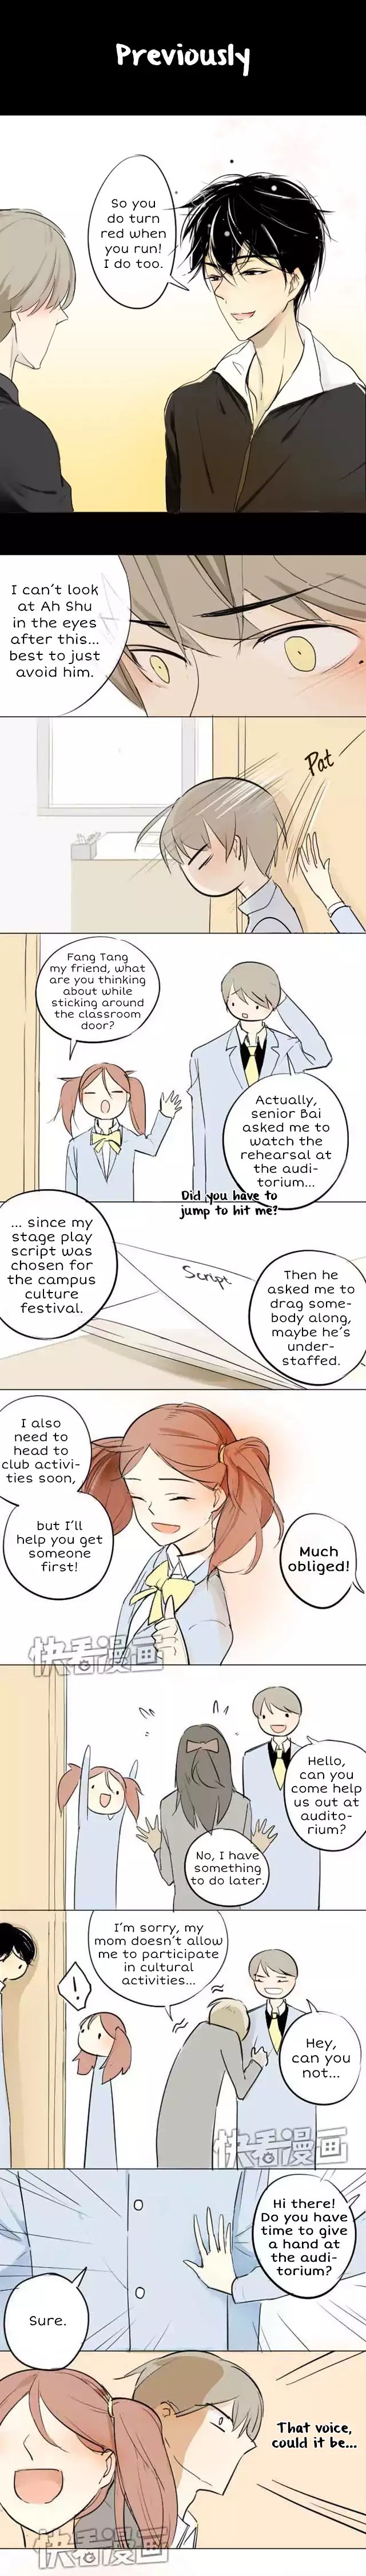 Classmate Relationship? - Page 1